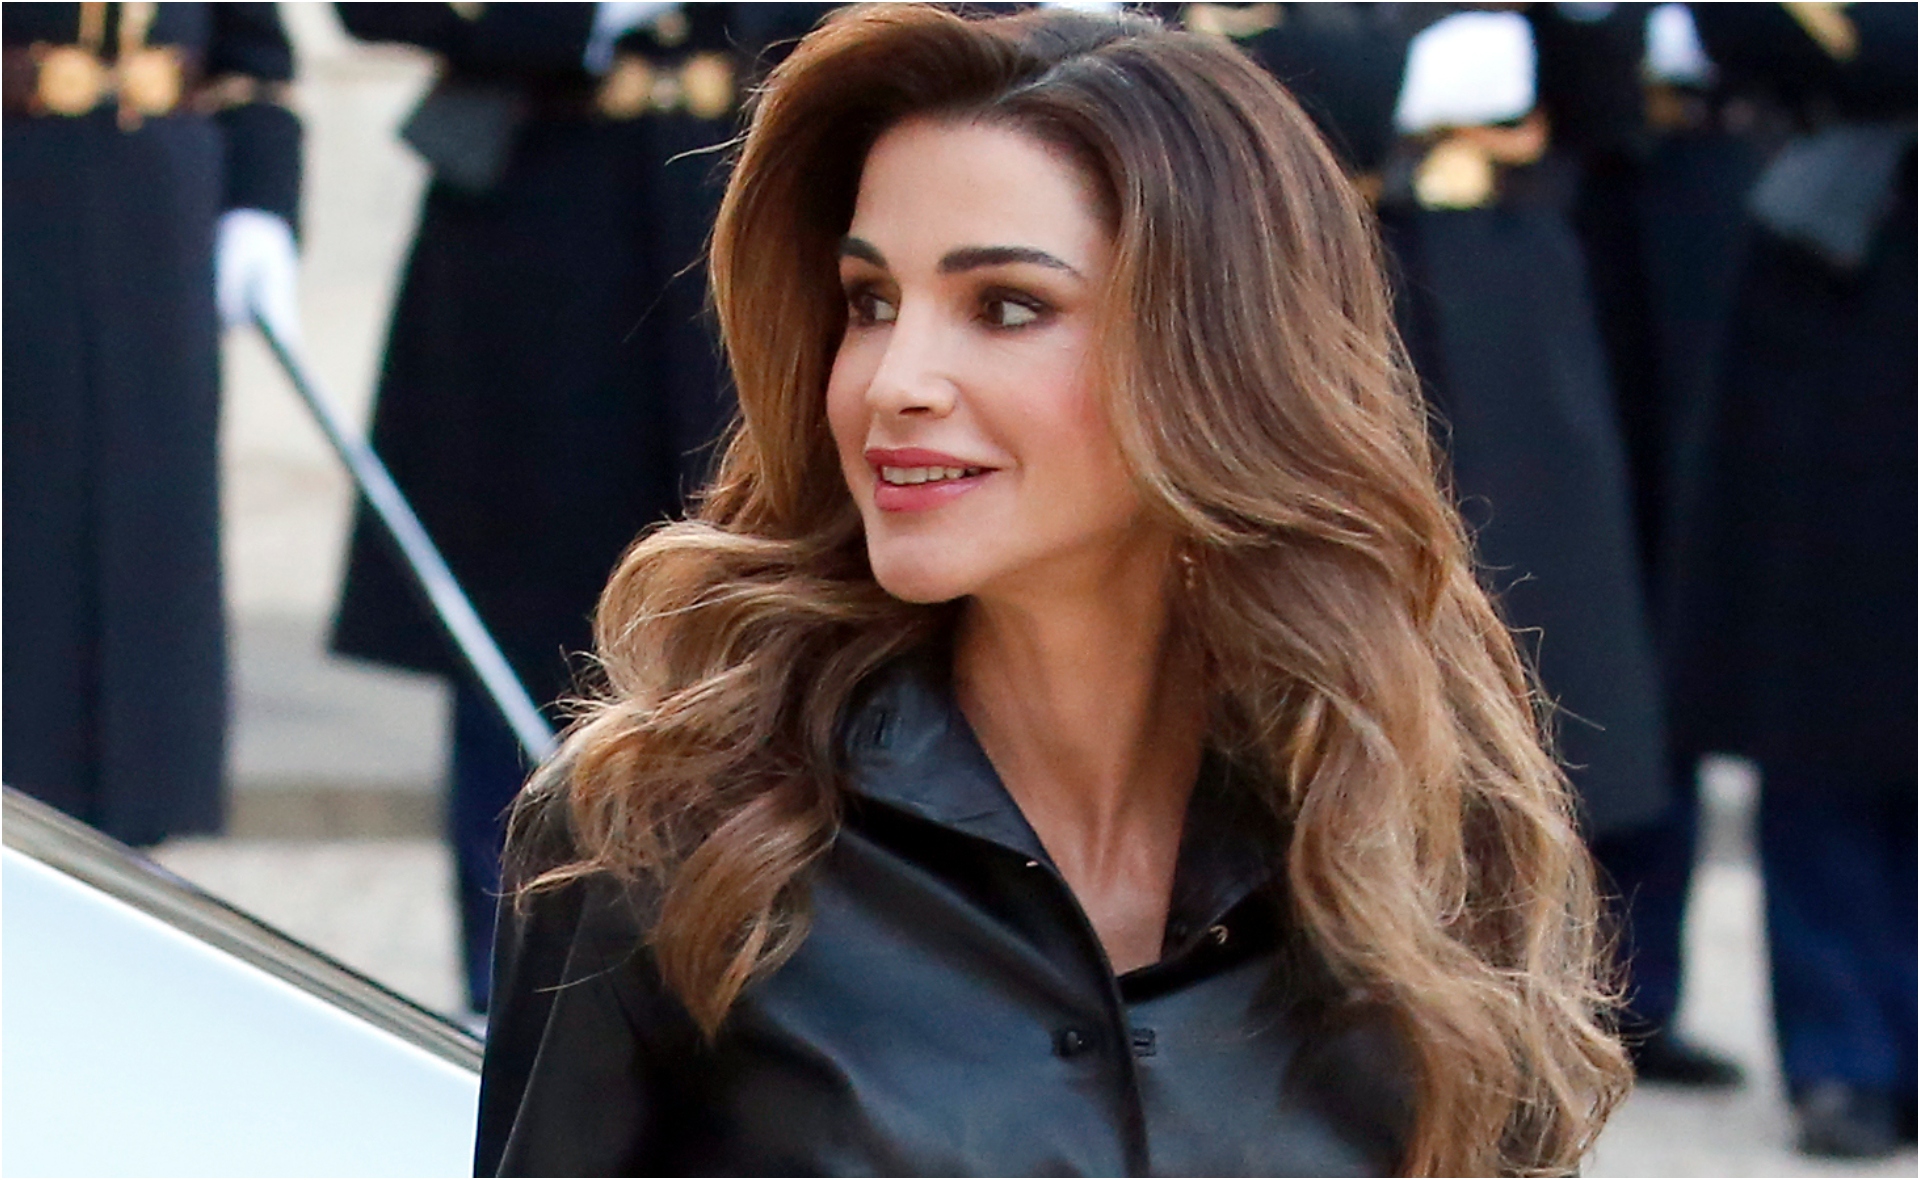 With one bright pink suit, Queen Rania of Jordan just proved she’s the unsung fashion icon of all royals